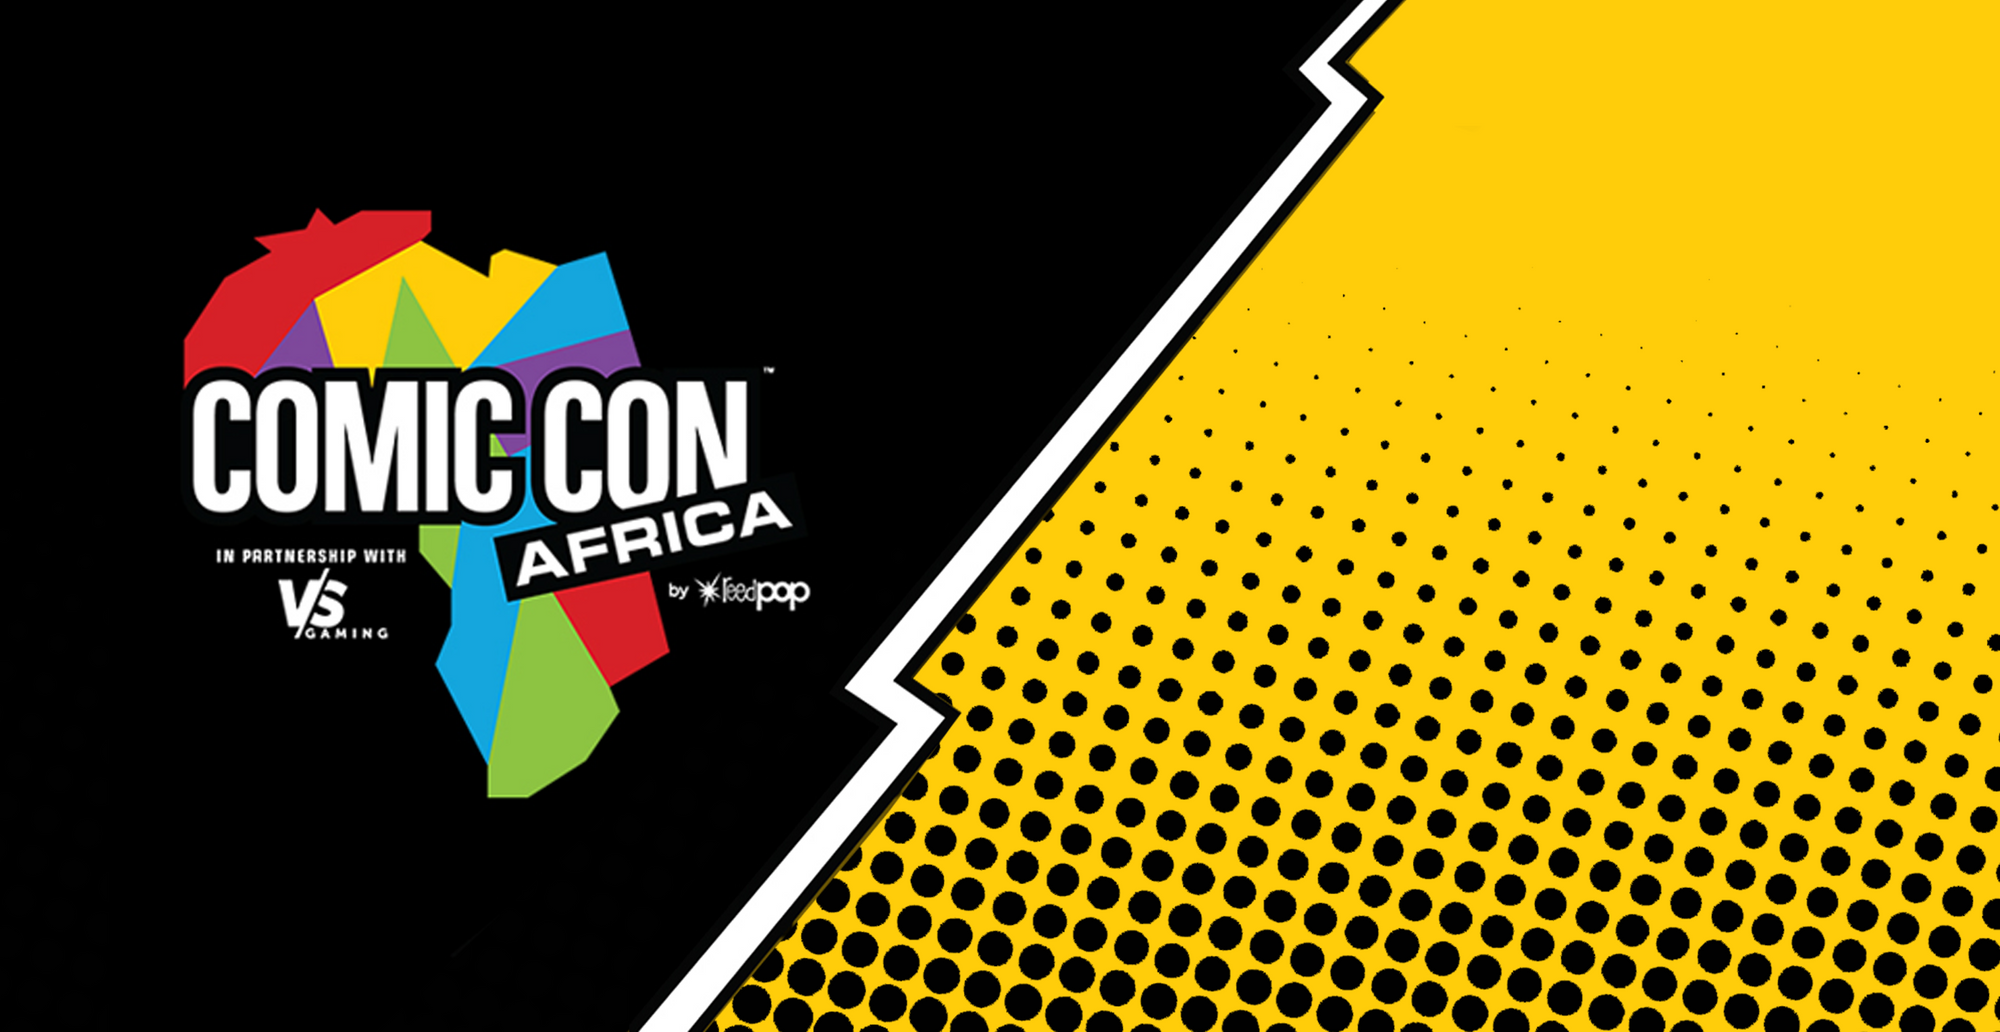 Comic Con is coming to Cape Town in 2020